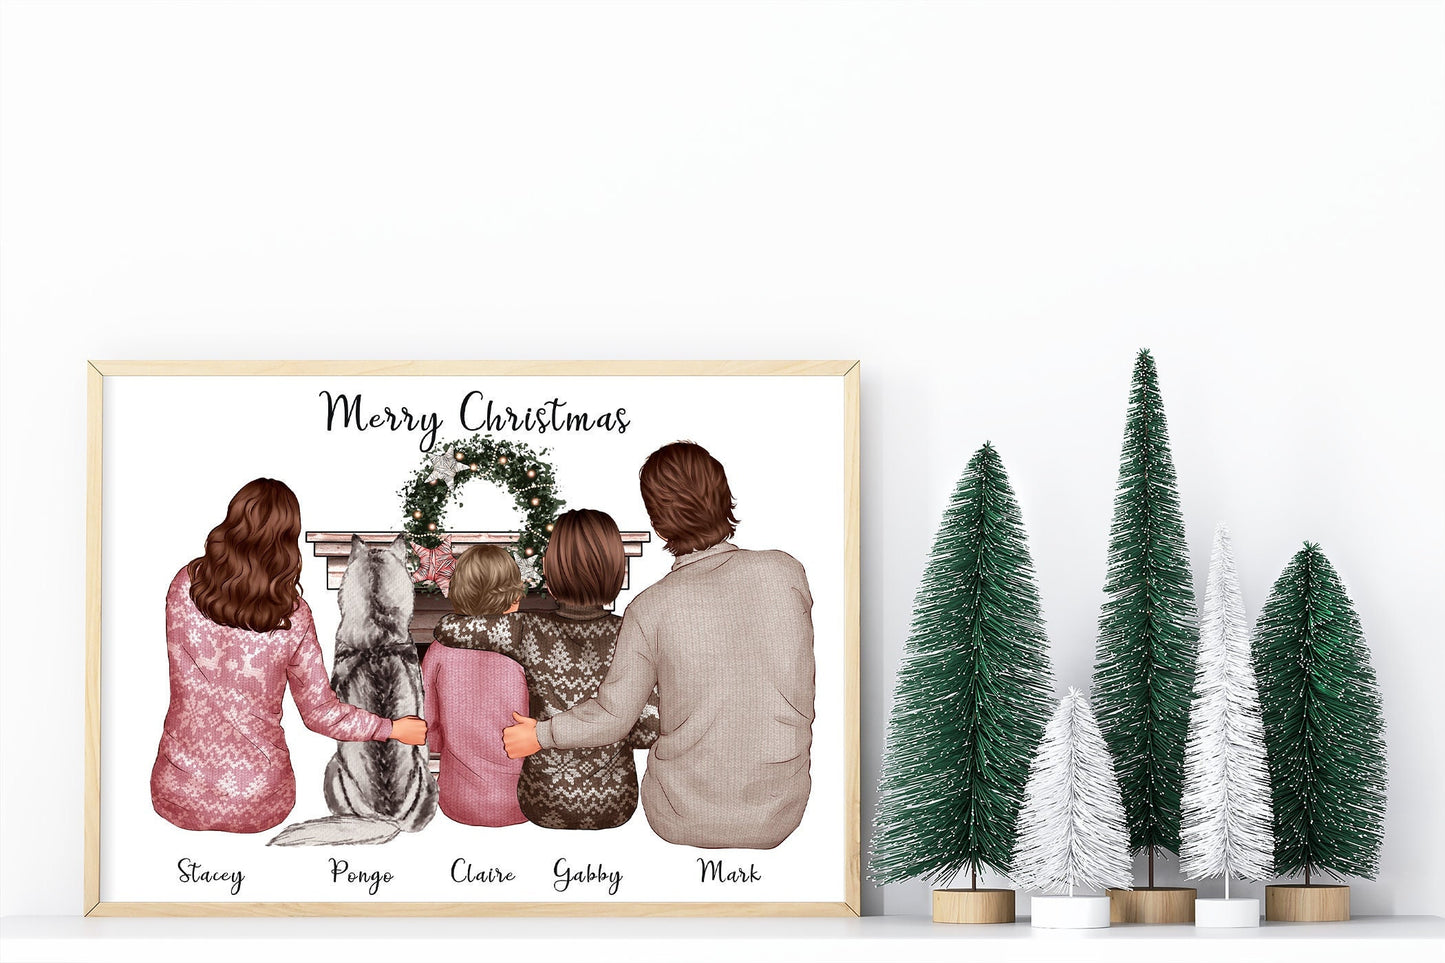 Christmas family print personalised with festive sweaters and winter holiday decor – treasured pets included too in A4, A5 or Greeting card